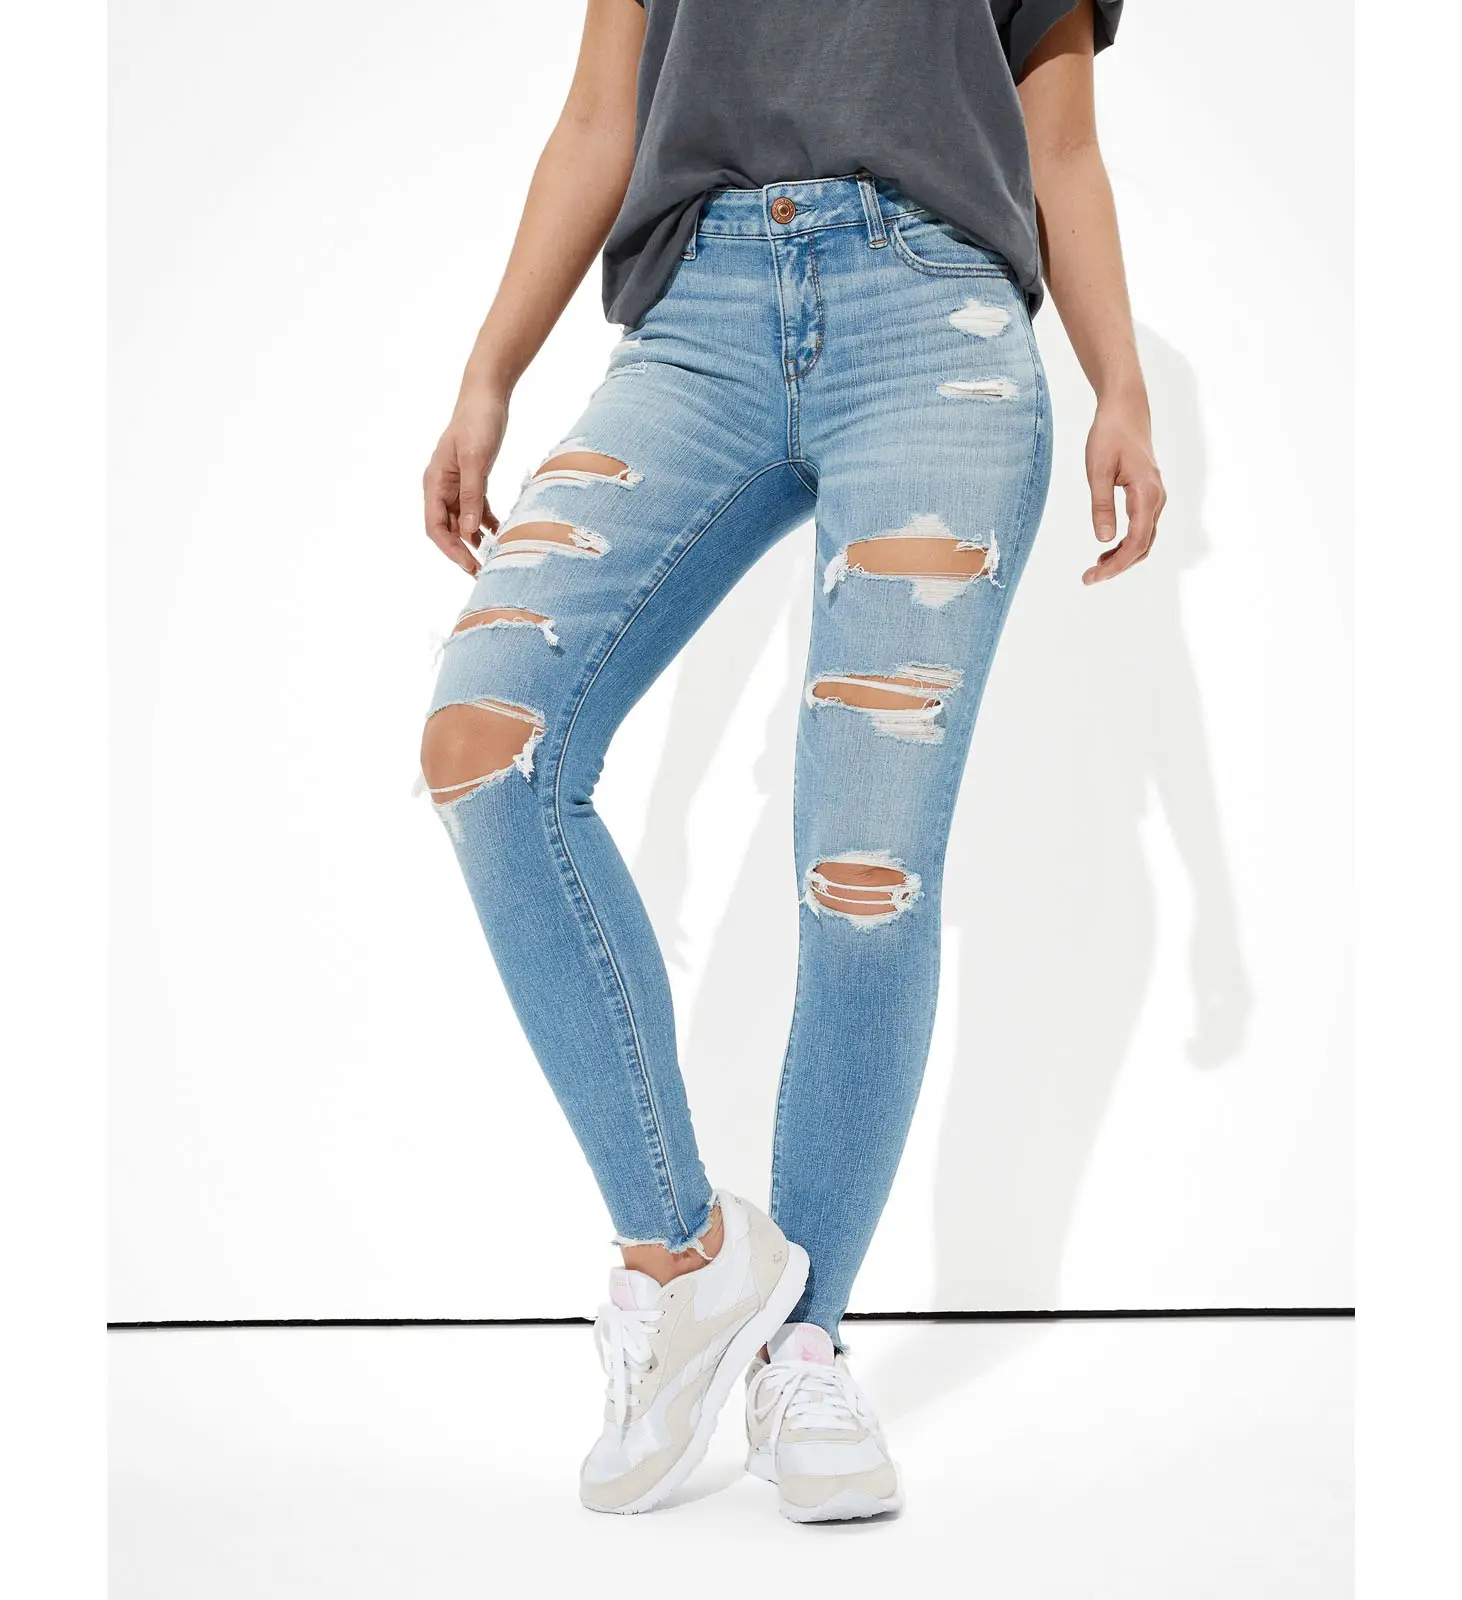 Real Denim Plus Size Womens Hoge Taille Skinny <span class=keywords><strong>Jeans</strong></span> Stretch Gat Vrouwen Gescheurde <span class=keywords><strong>Jeans</strong></span>